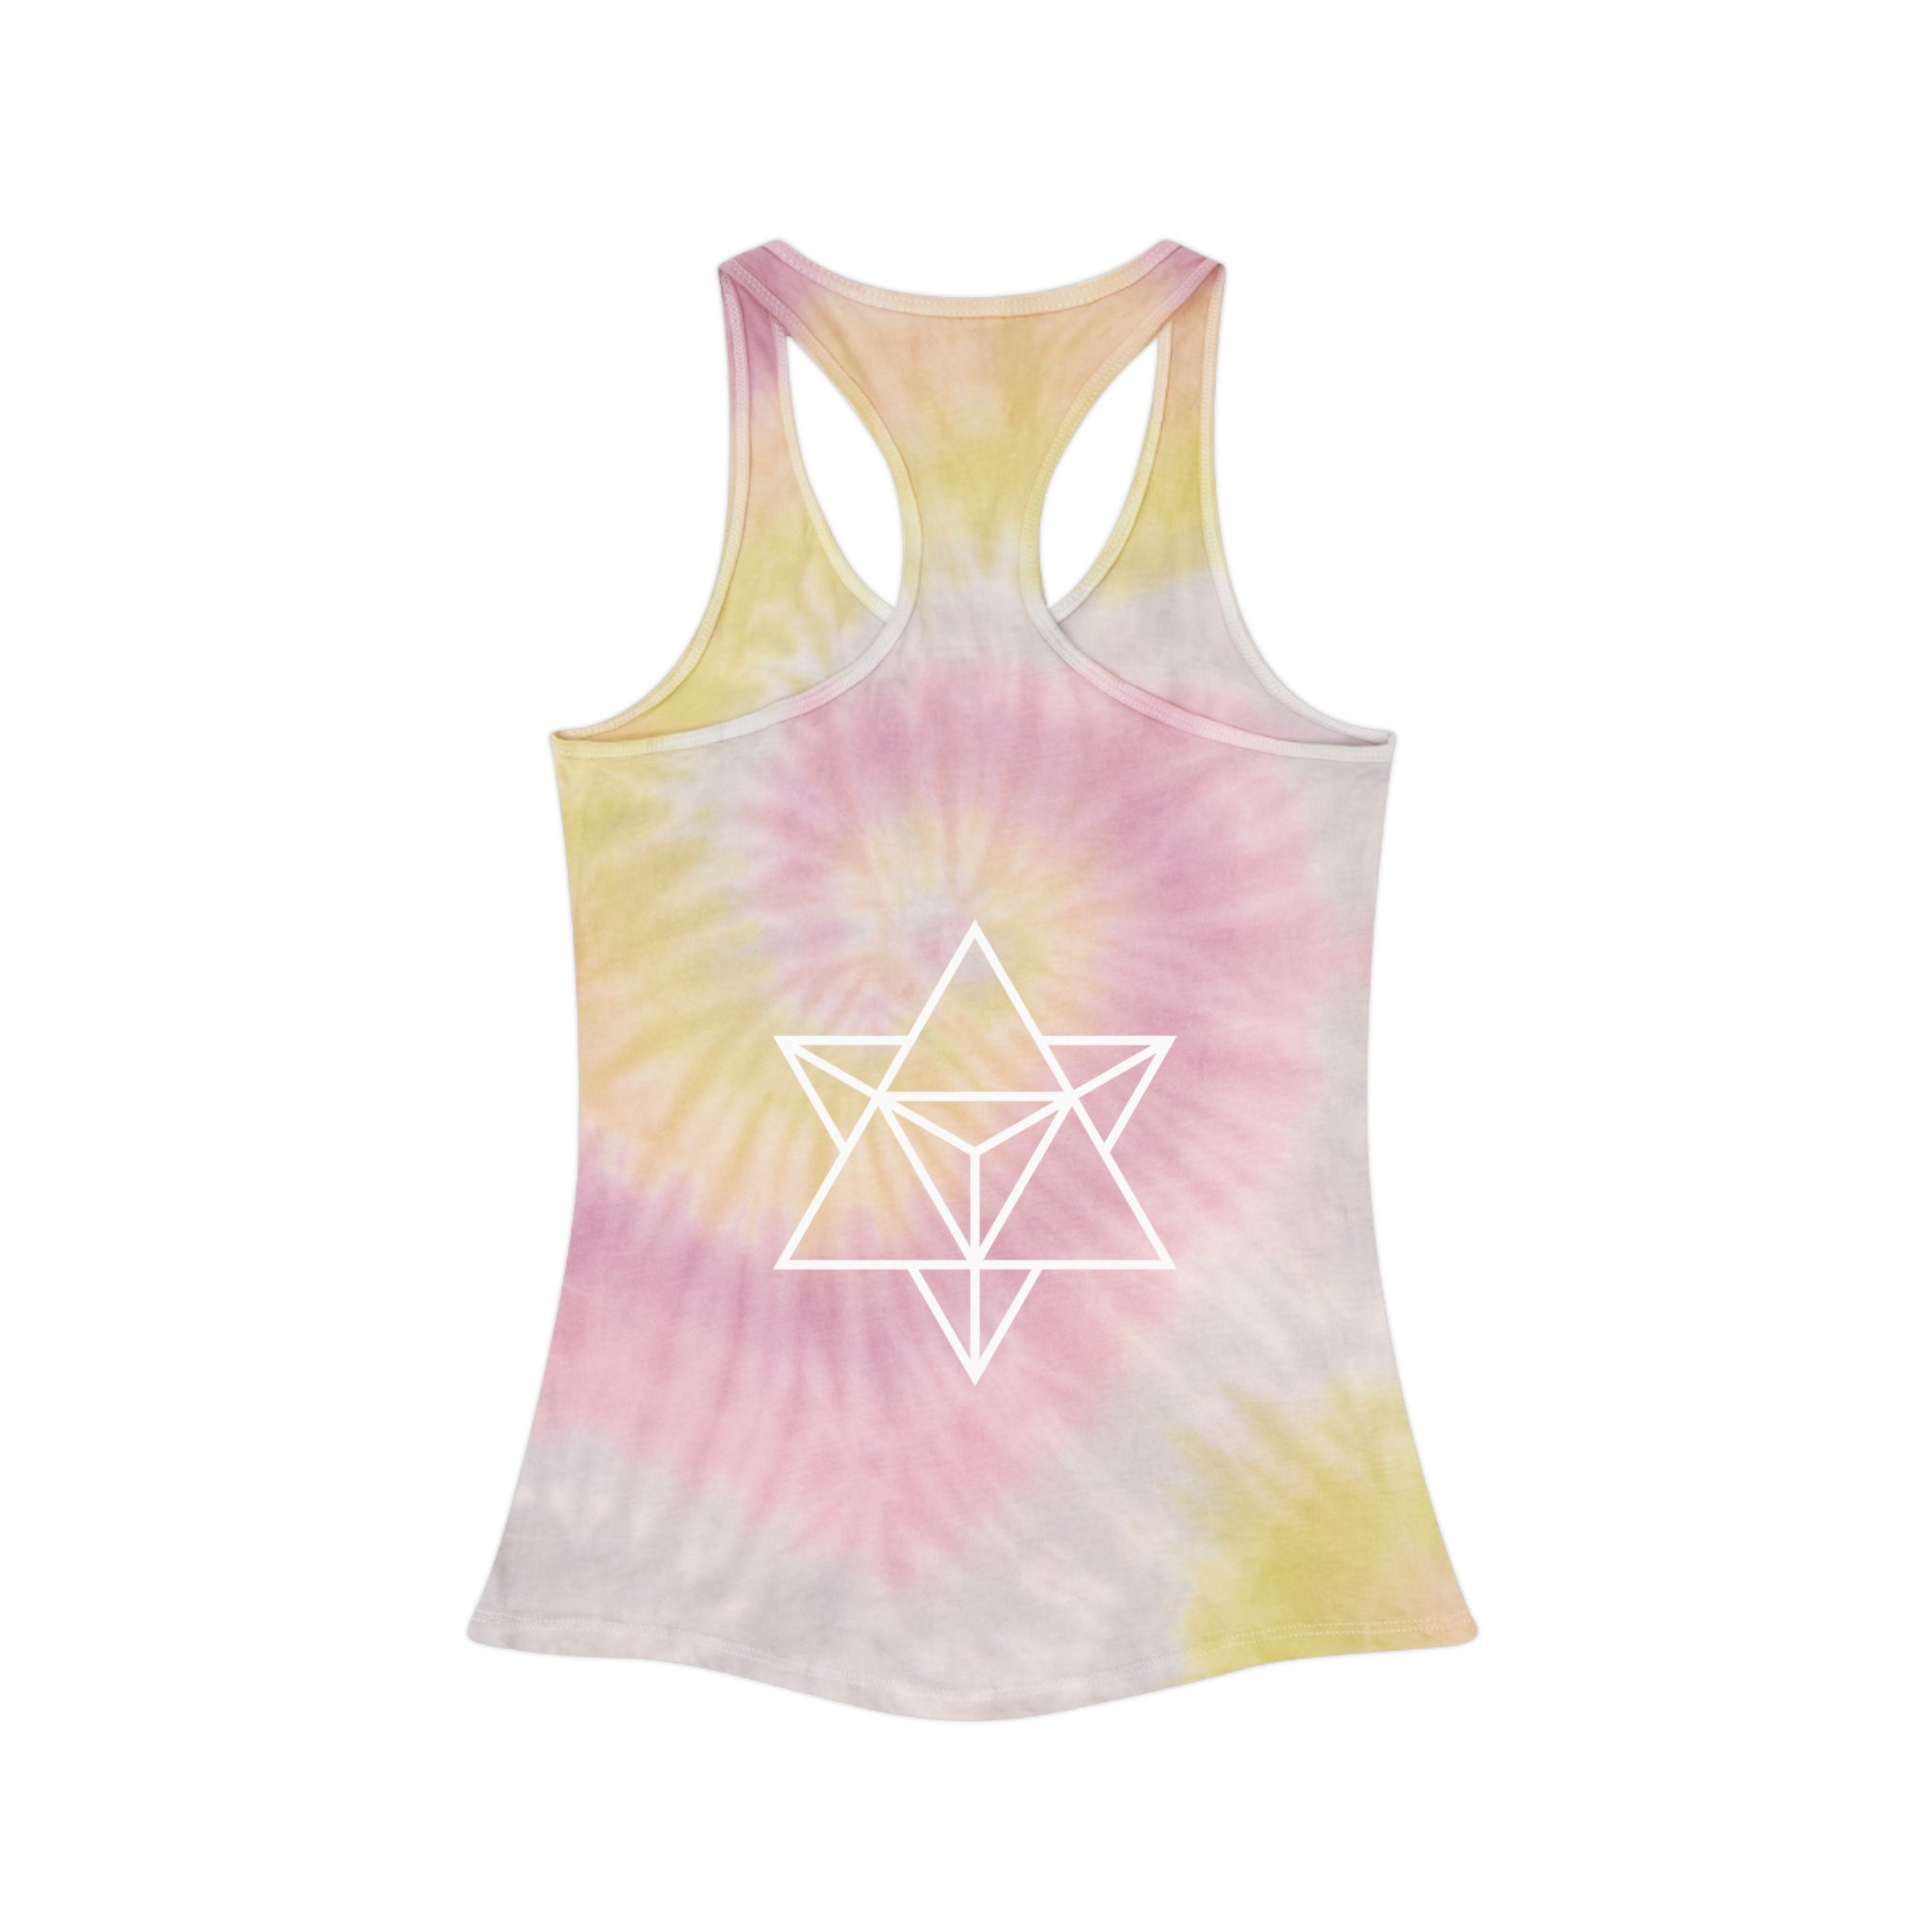 Truth Love Authenticity Tie Dye Tank Top